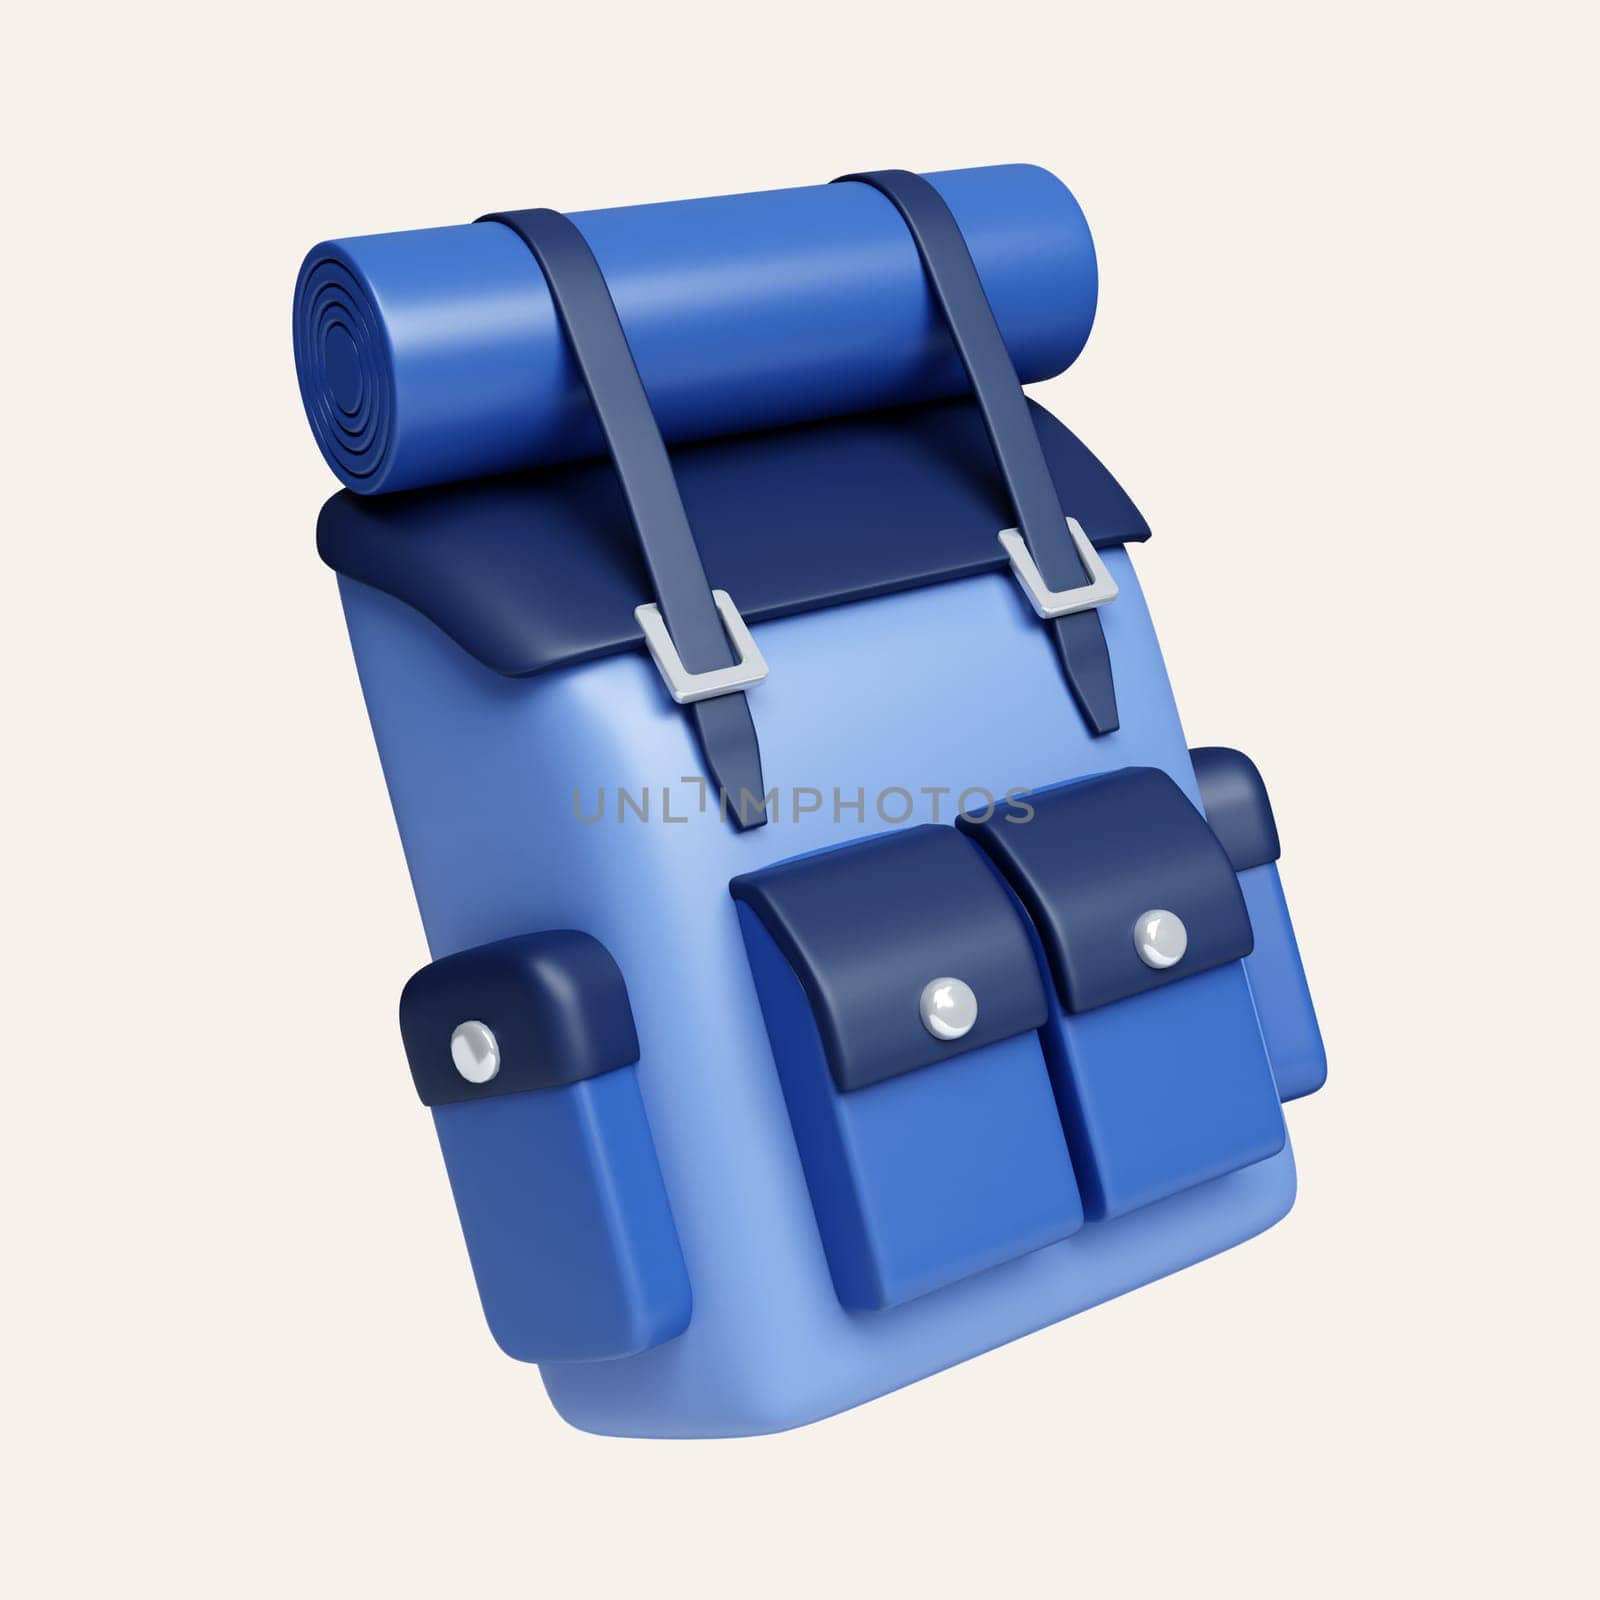 3D Blue Travel Backpacks ,for traveling concept. icon isolated on white background. 3d rendering illustration. Clipping path. by meepiangraphic